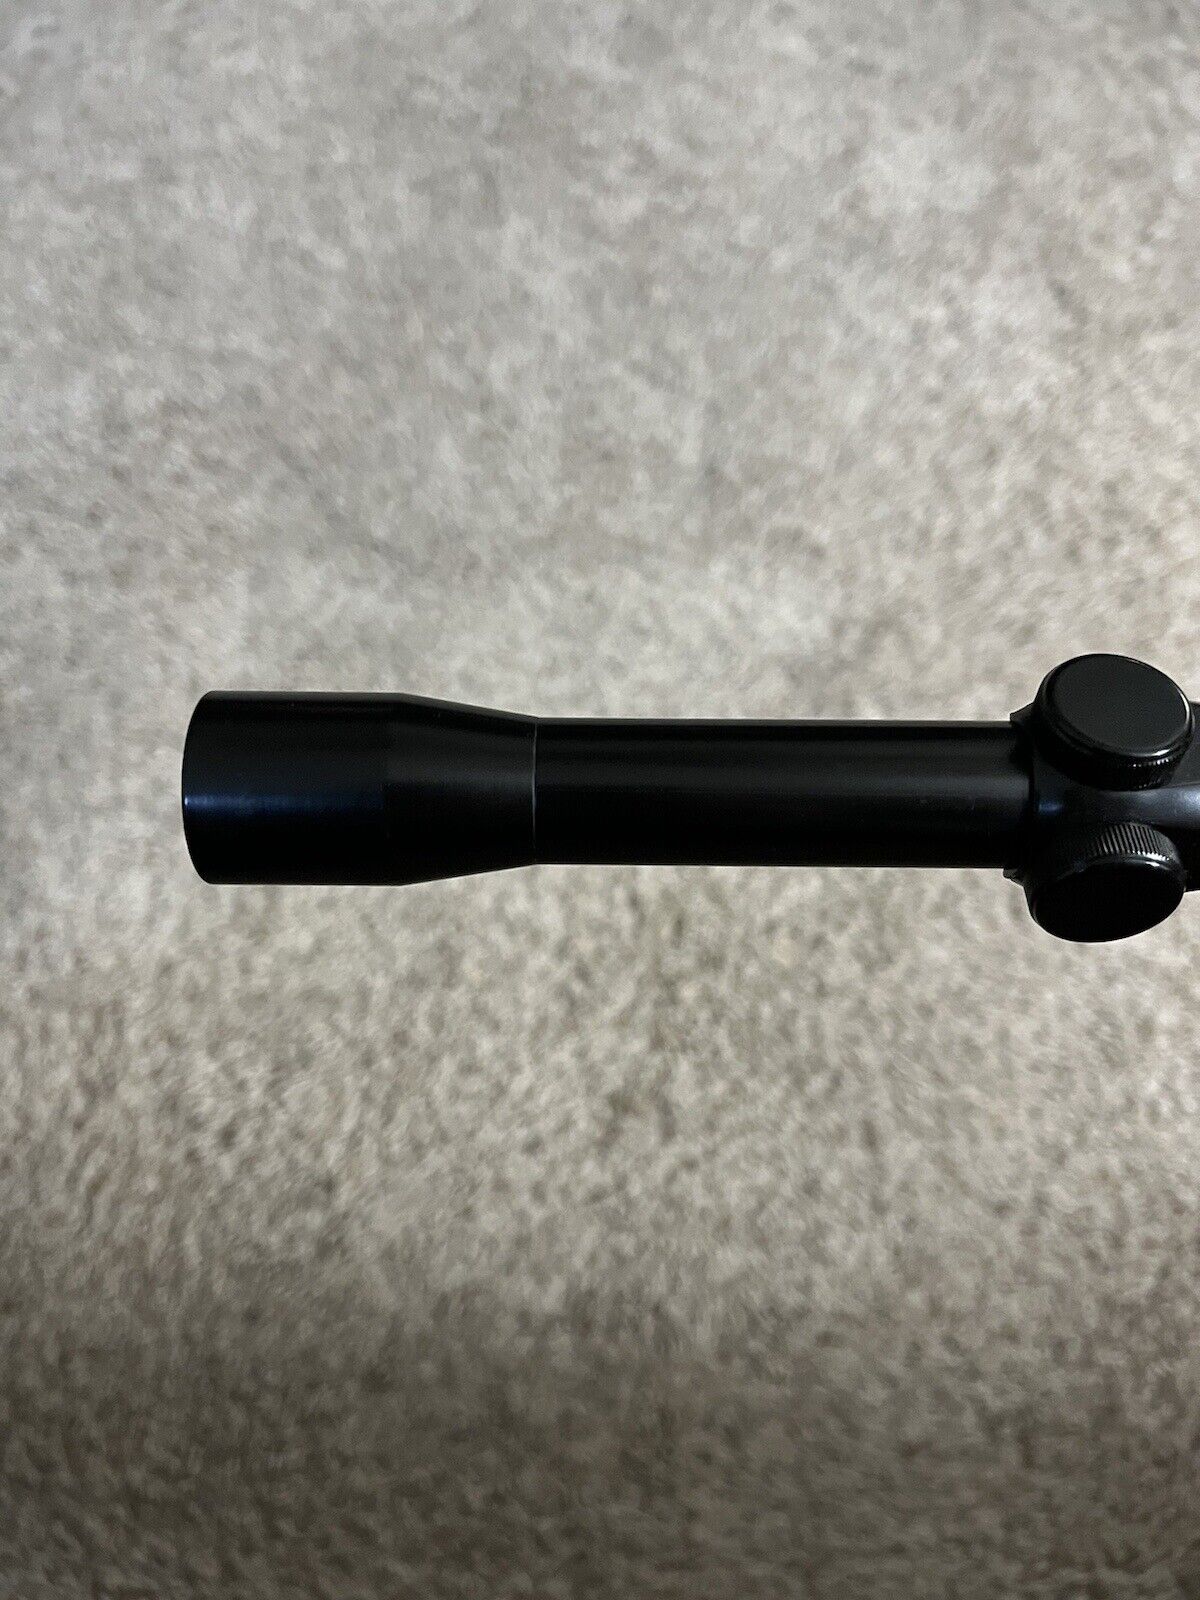 President John F. Kennedy Rifle Scope Used By Lee H. Oswald.